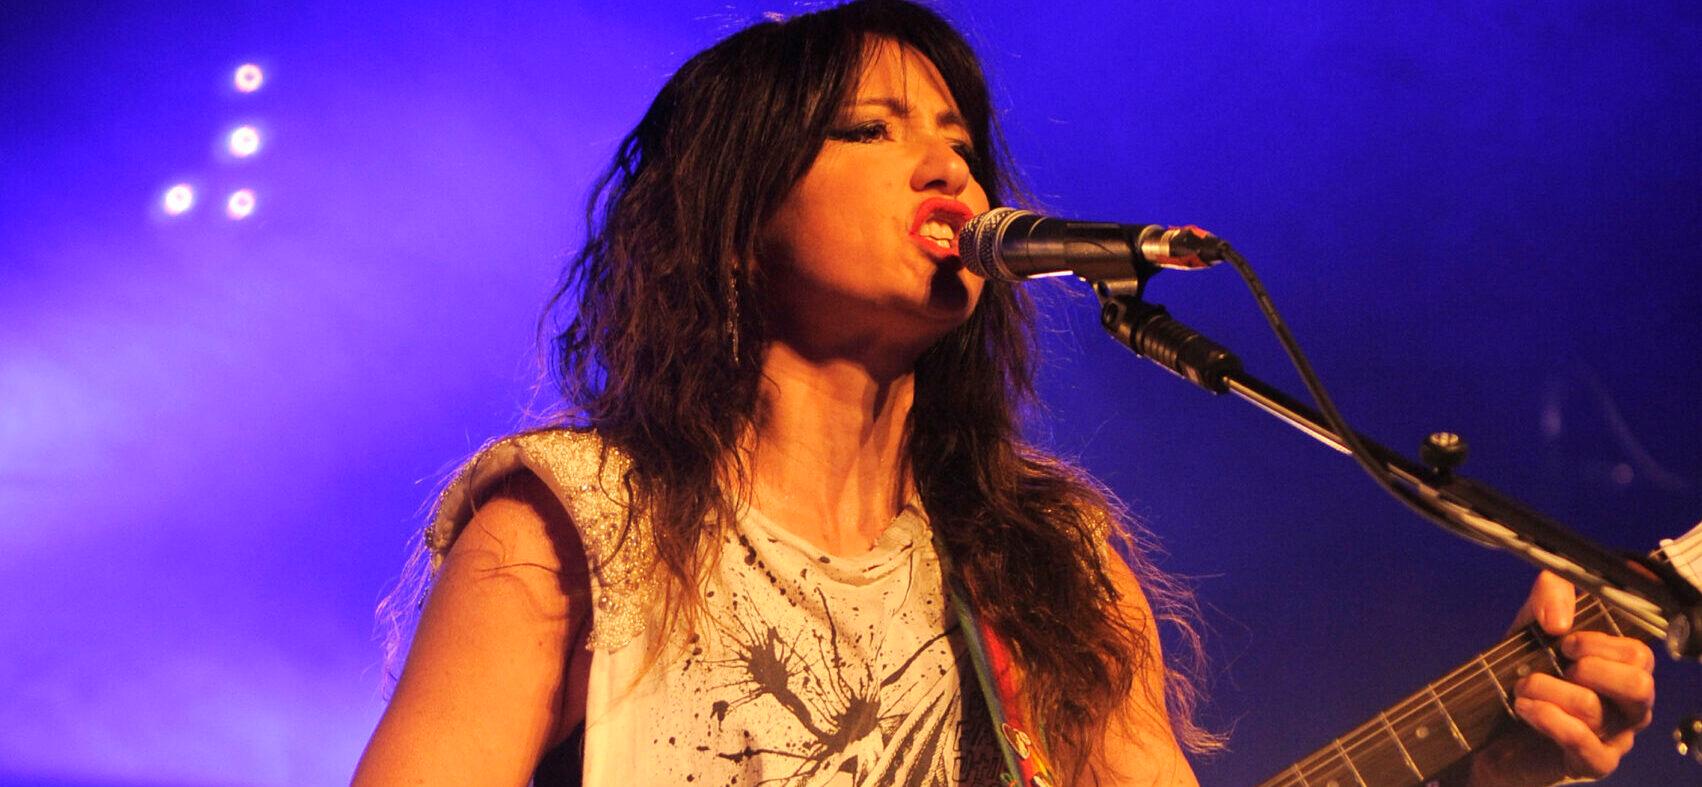 Singer KT Tunstall Files For Divorce From Husband After 5 Years Of Marriage